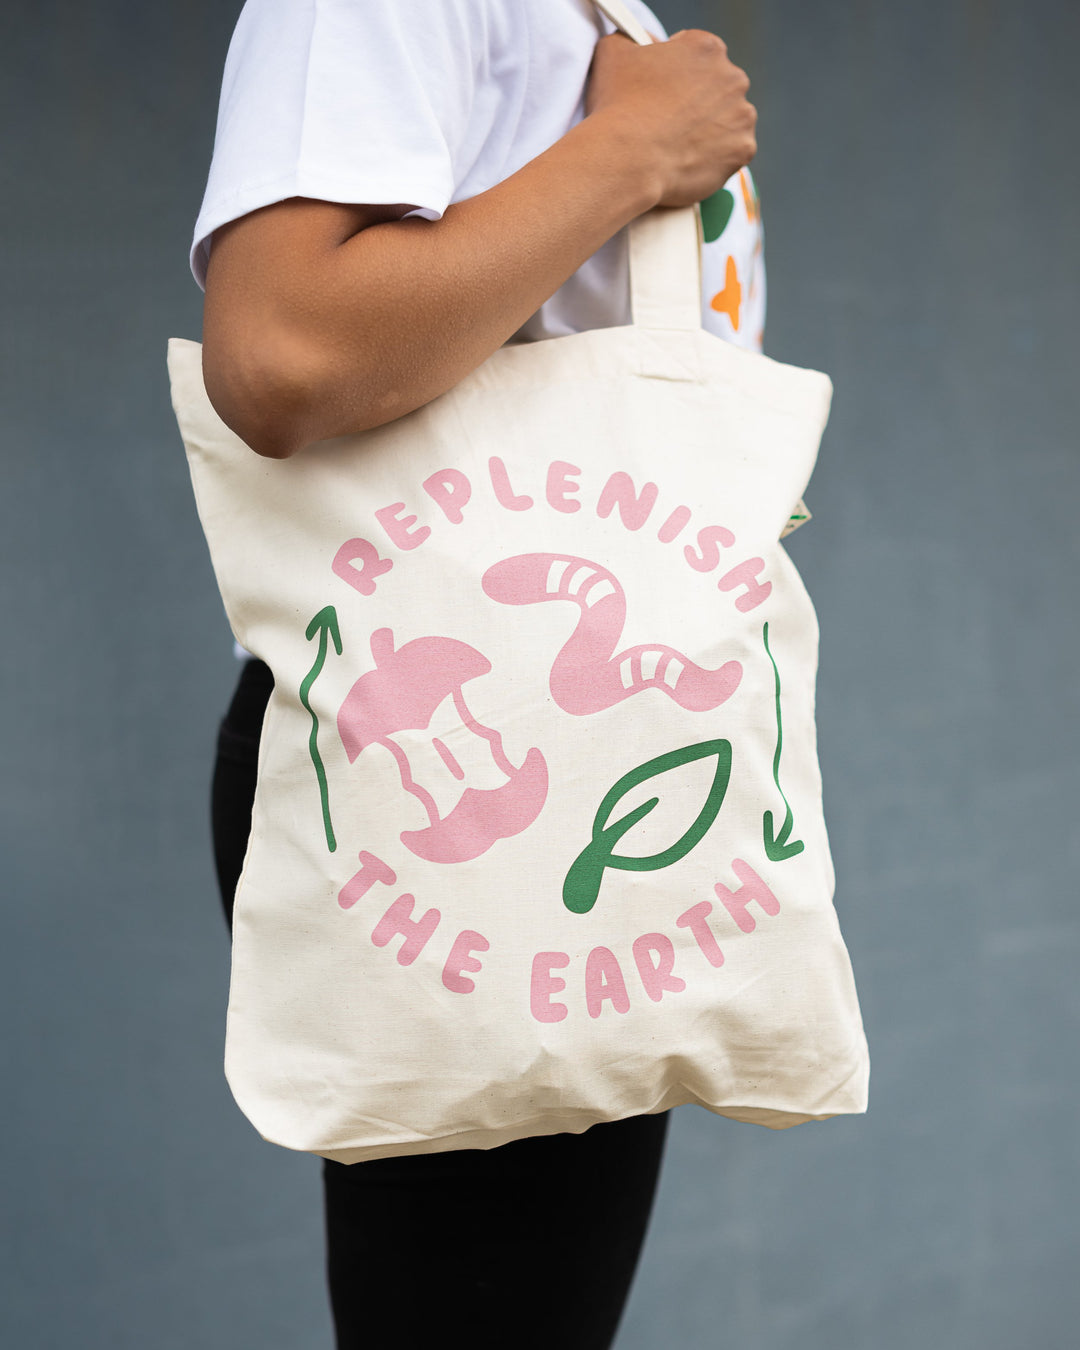 arm holding organic white cotton tote with pink and green design saying replenish the earth with apple, worm and leaf